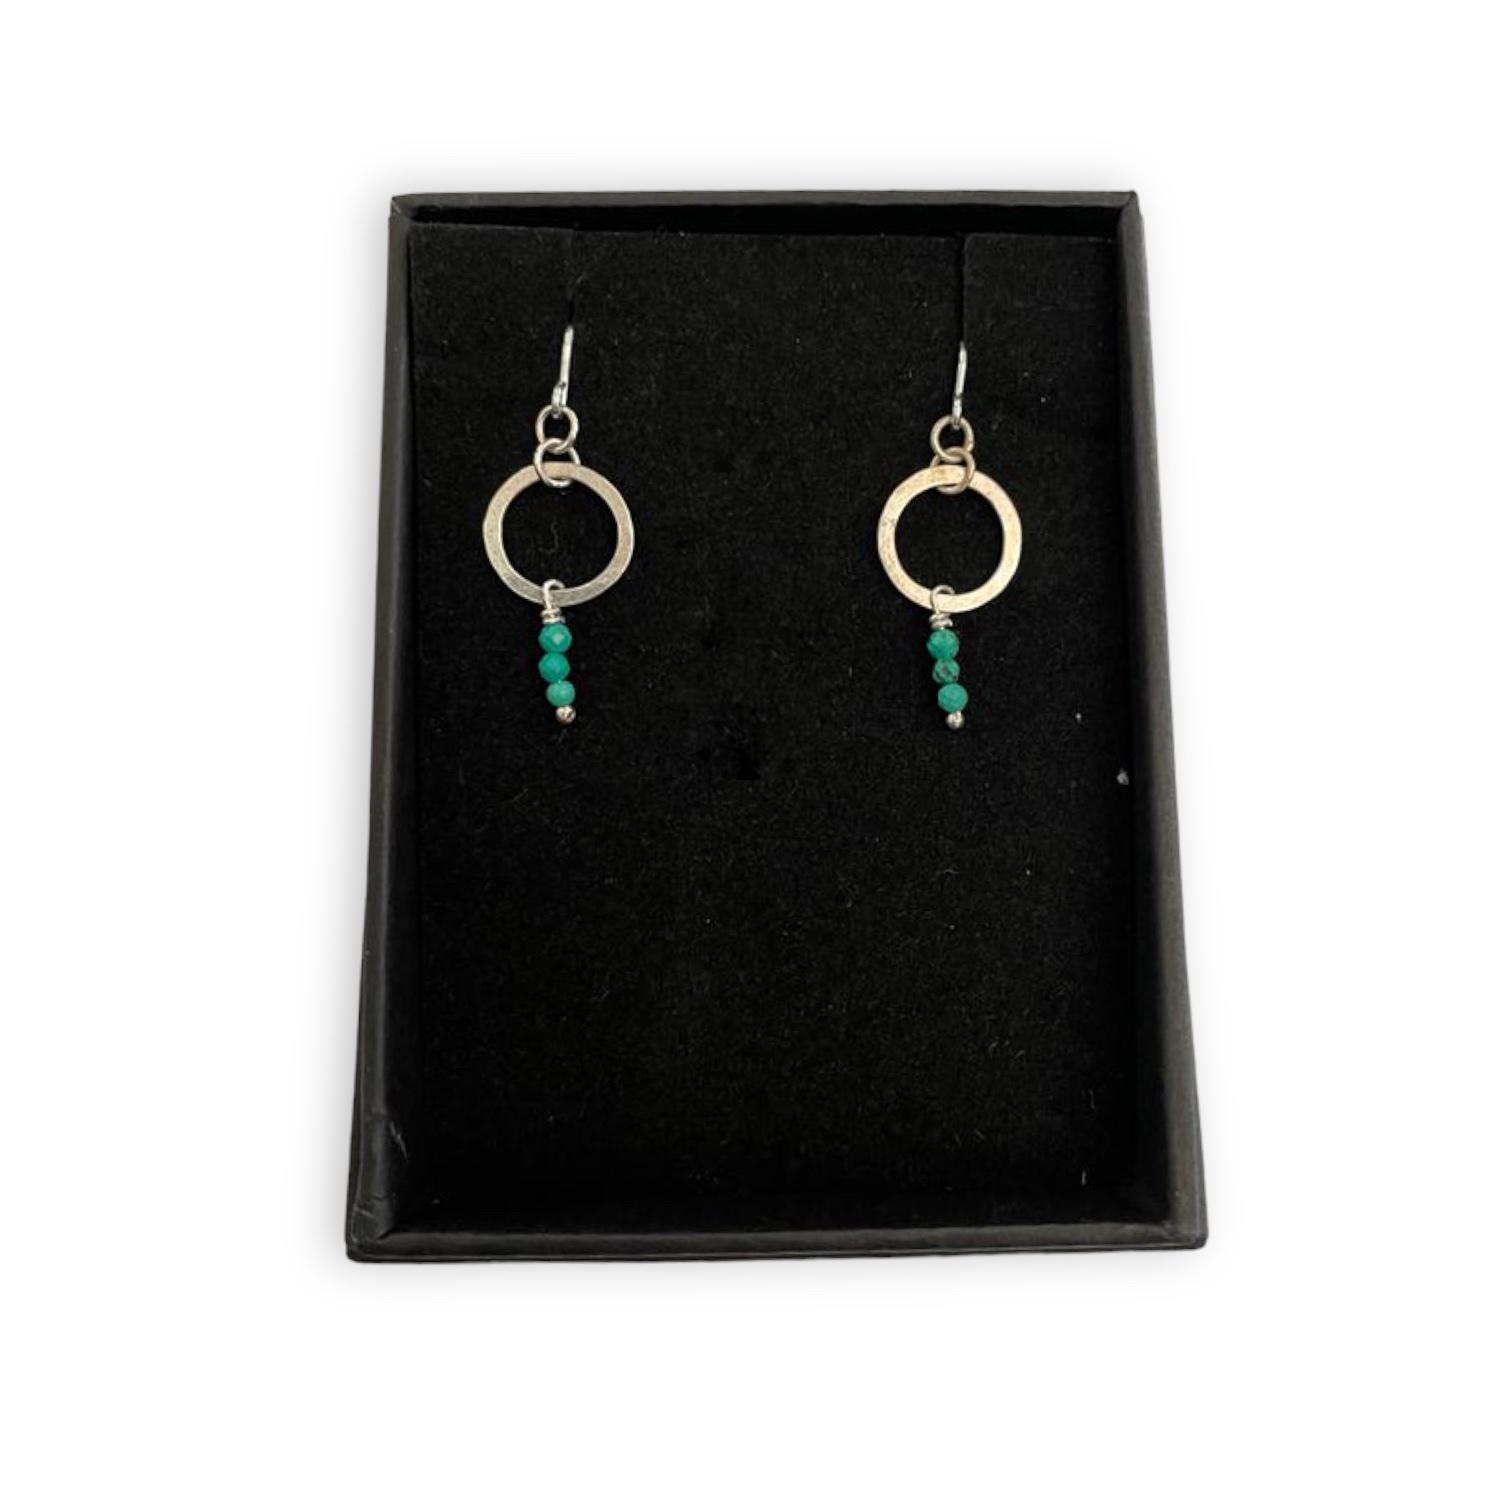 MSJ110 Tiny Turquoise Stack Ring Earrings by MAdeleine Spencer Jewellery